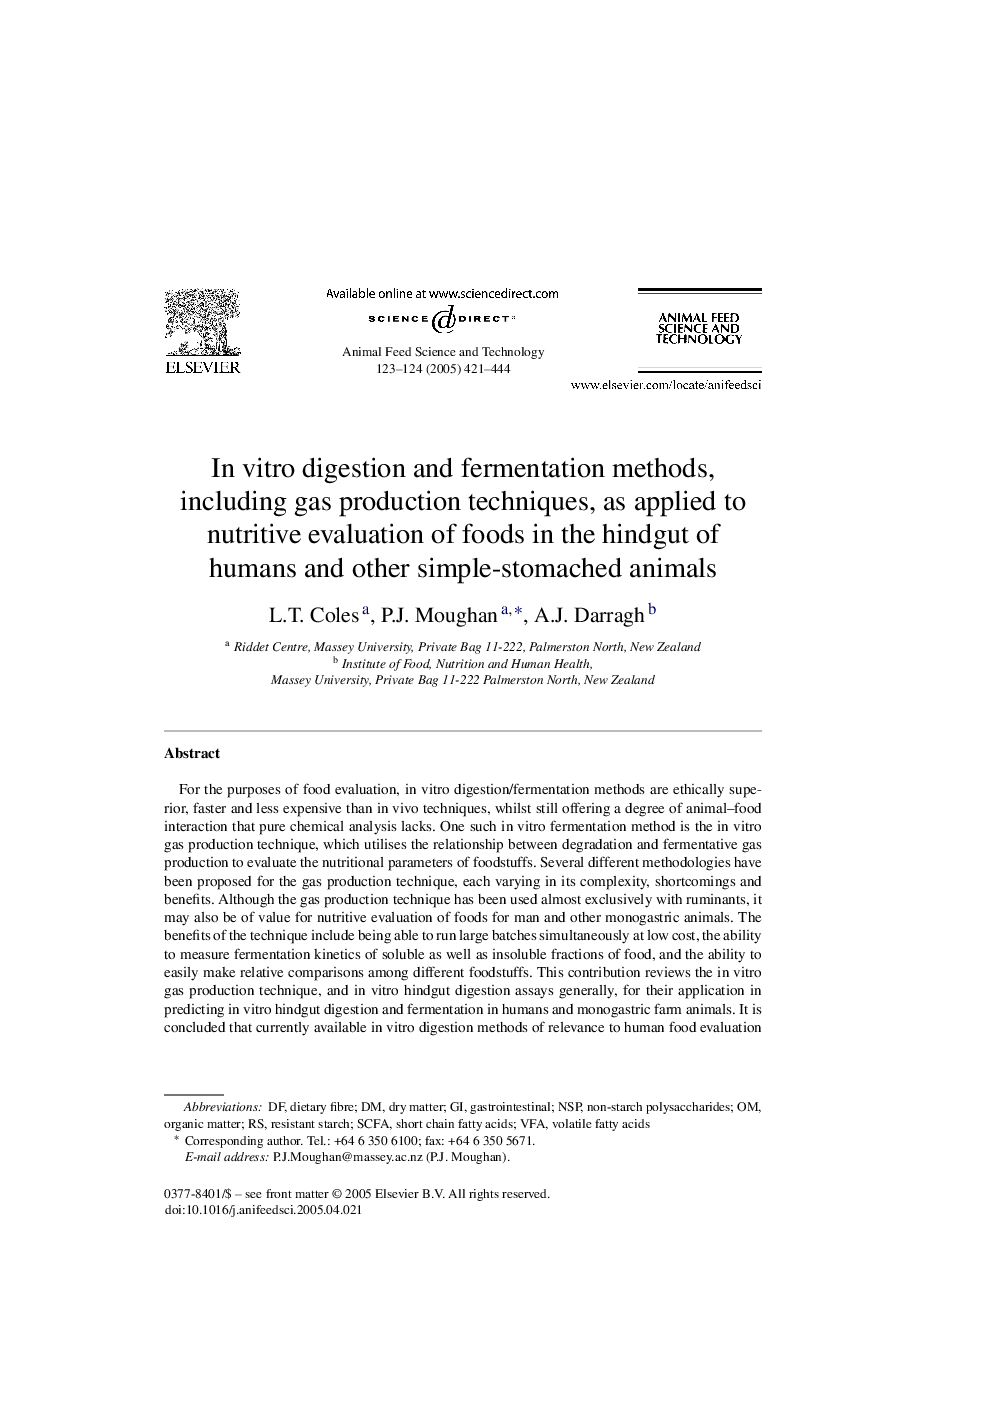 In vitro digestion and fermentation methods, including gas production techniques, as applied to nutritive evaluation of foods in the hindgut of humans and other simple-stomached animals